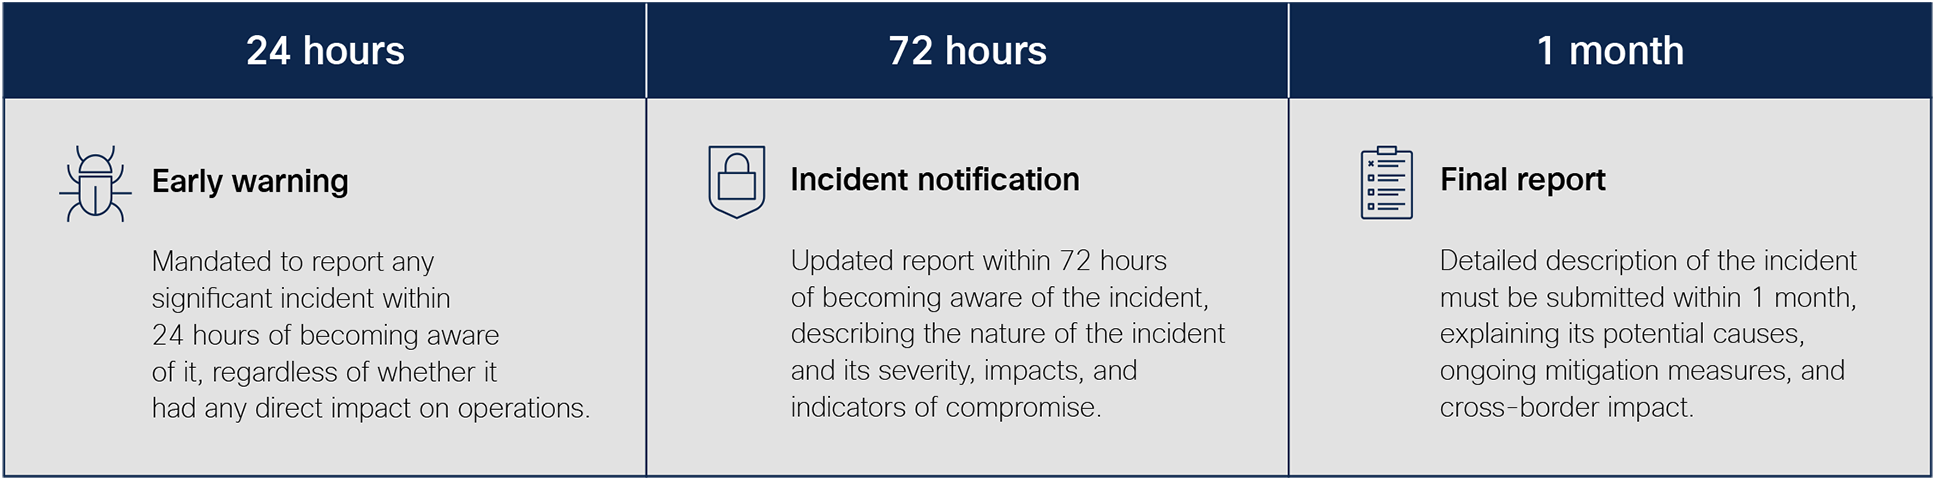 Timeline for required notifications of cybersecurity incidents